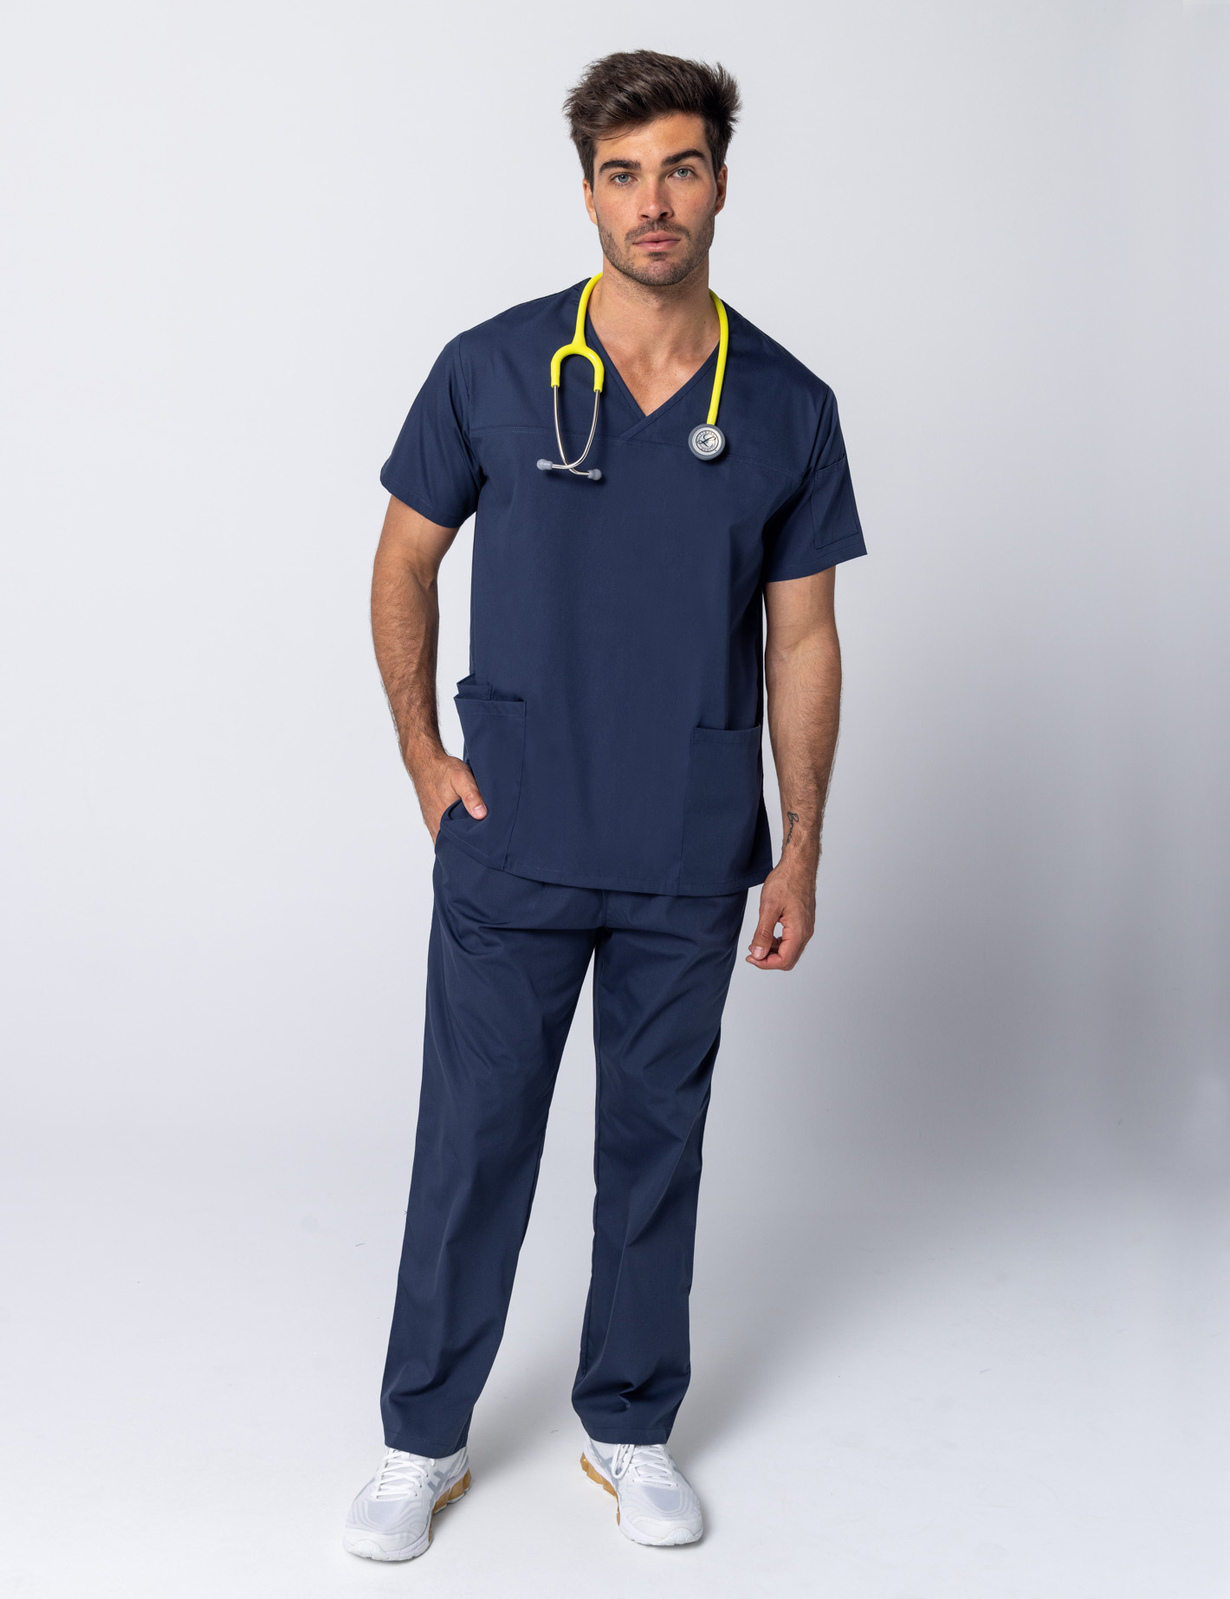 Men's Fit Solid Scrub Top - Navy - XX Small